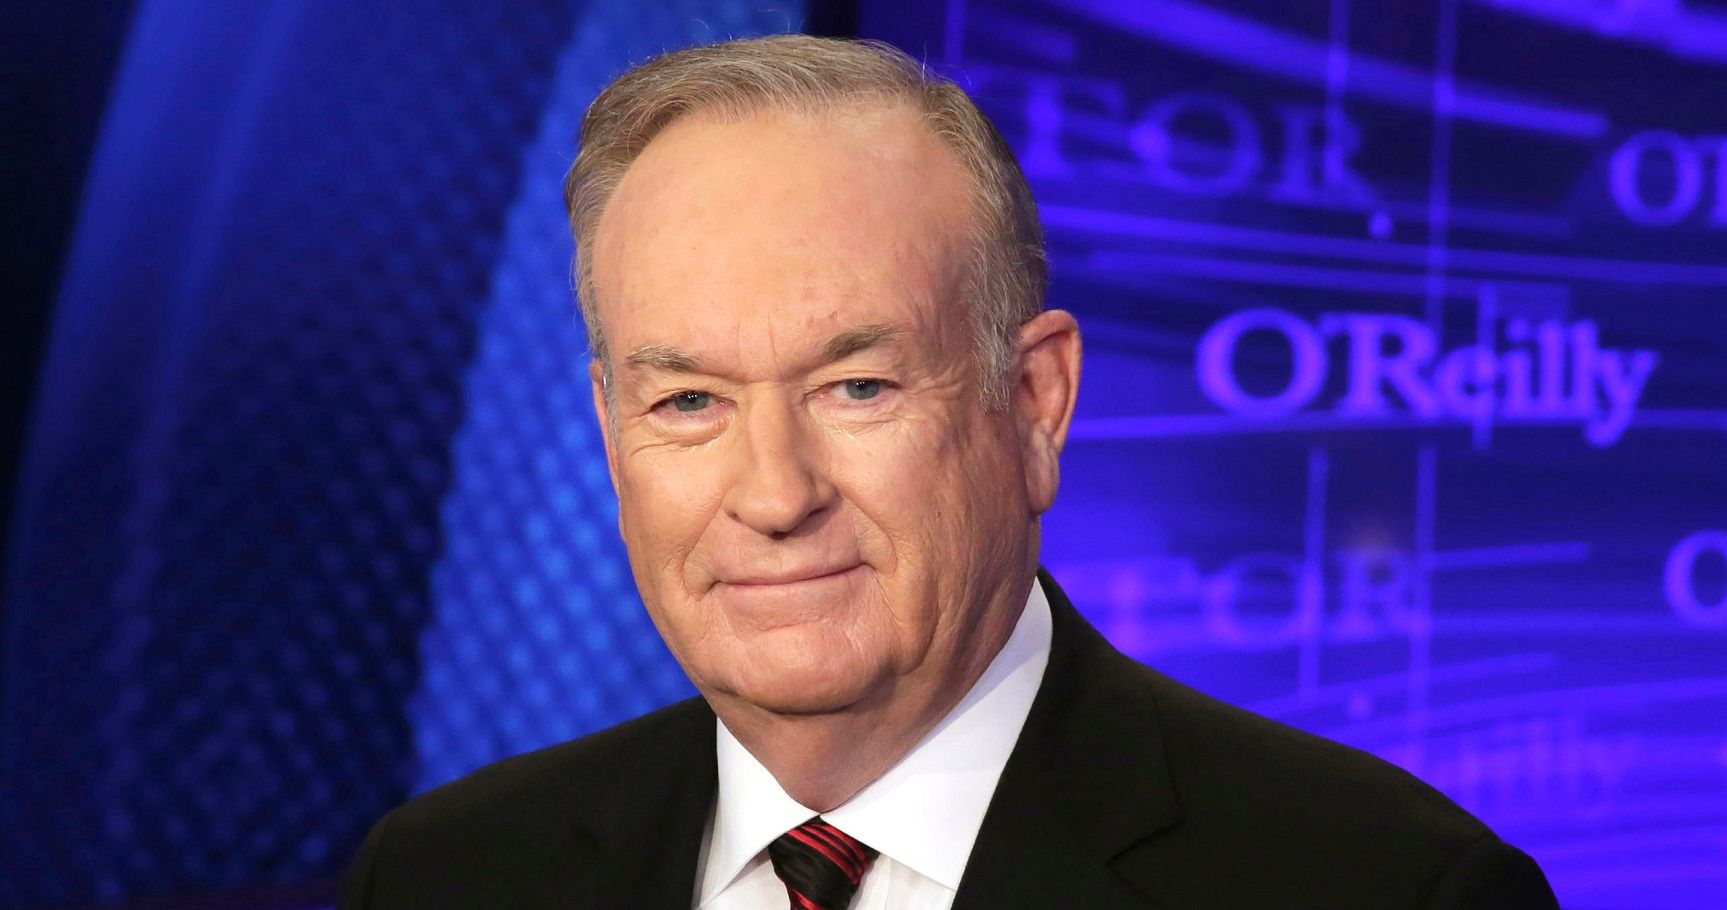 Bill O’Reilly Loses Custody Of His Children After Alleged Domestic